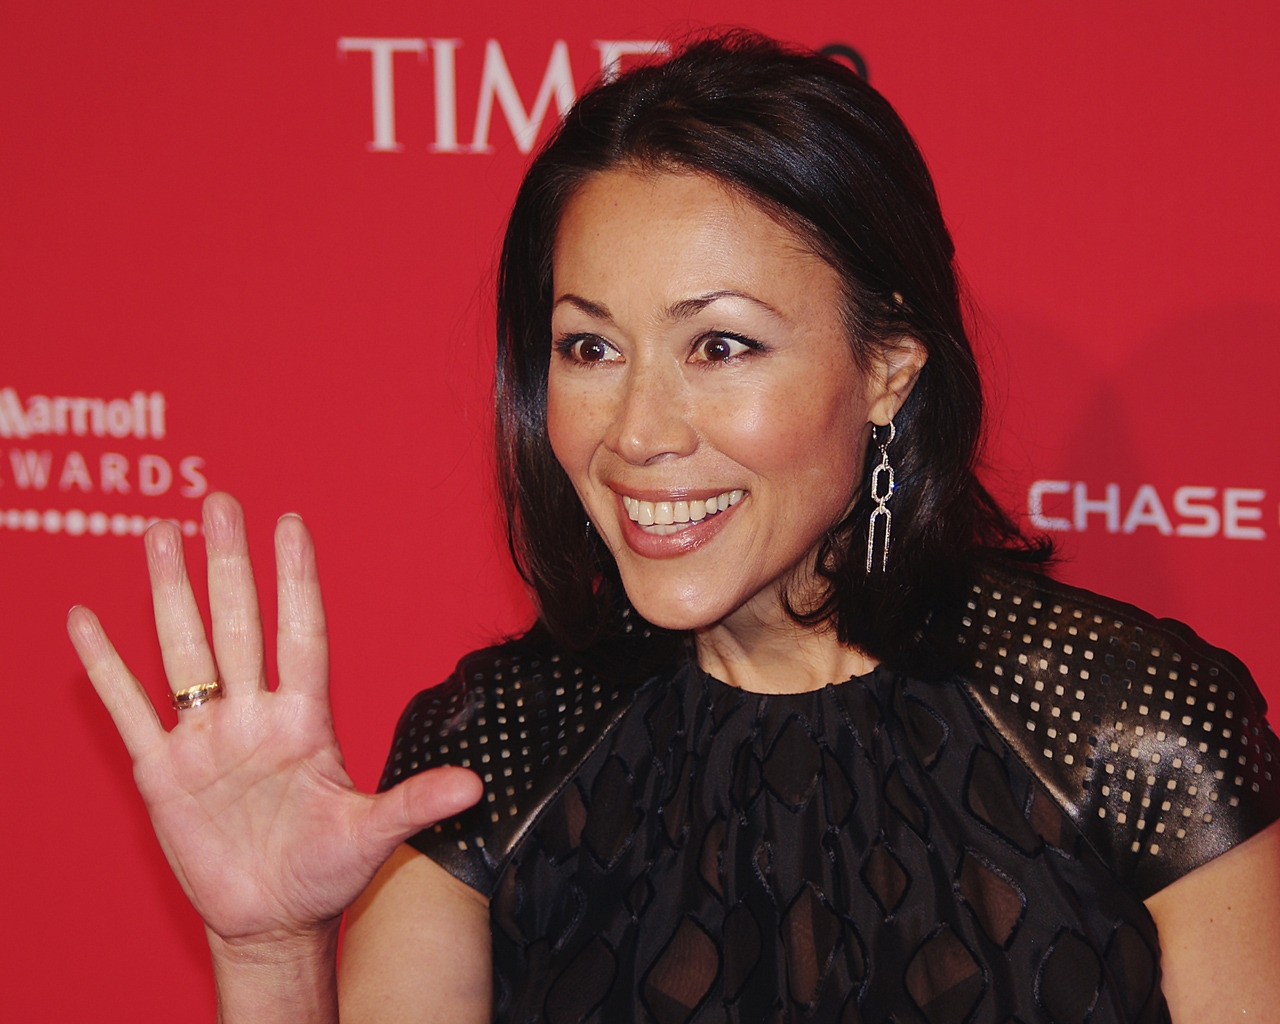 Ann Curry Look for 1280 x 1024 resolution